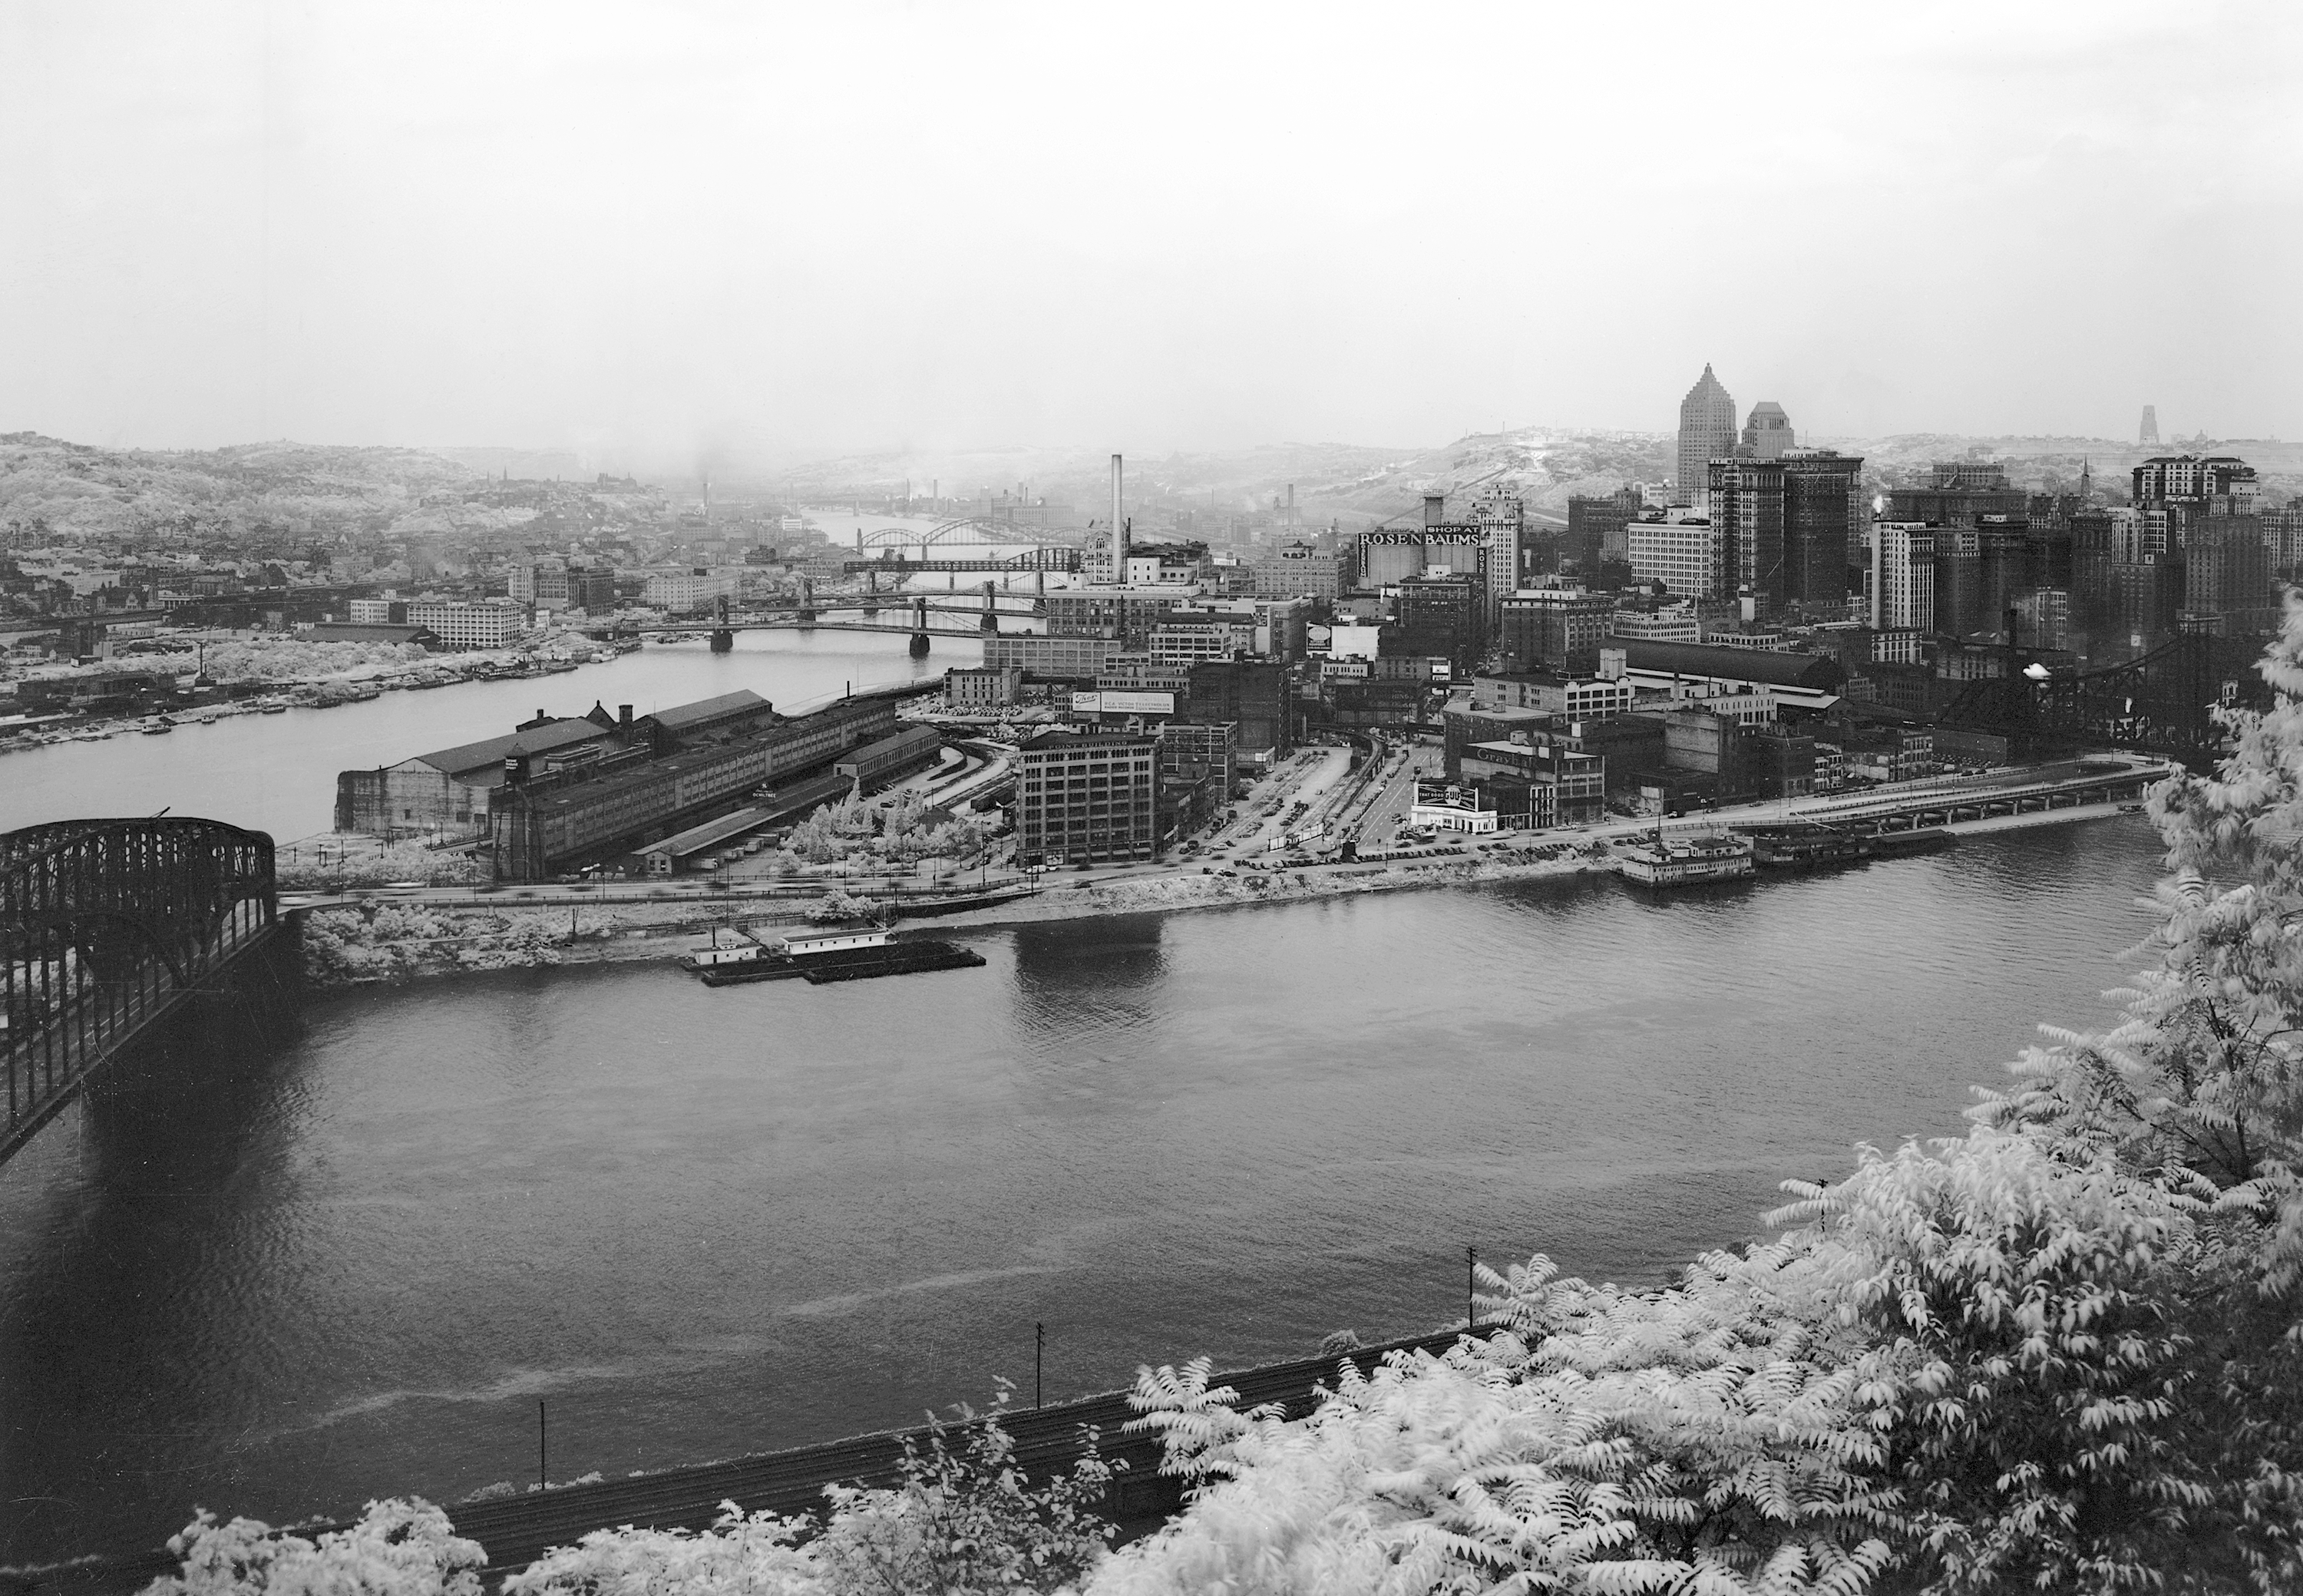 A view of Downtown Pittsburgh in 1943 from the Pittsburgh City Photographer Collection, Archives Service Center, University of Pittsburgh.